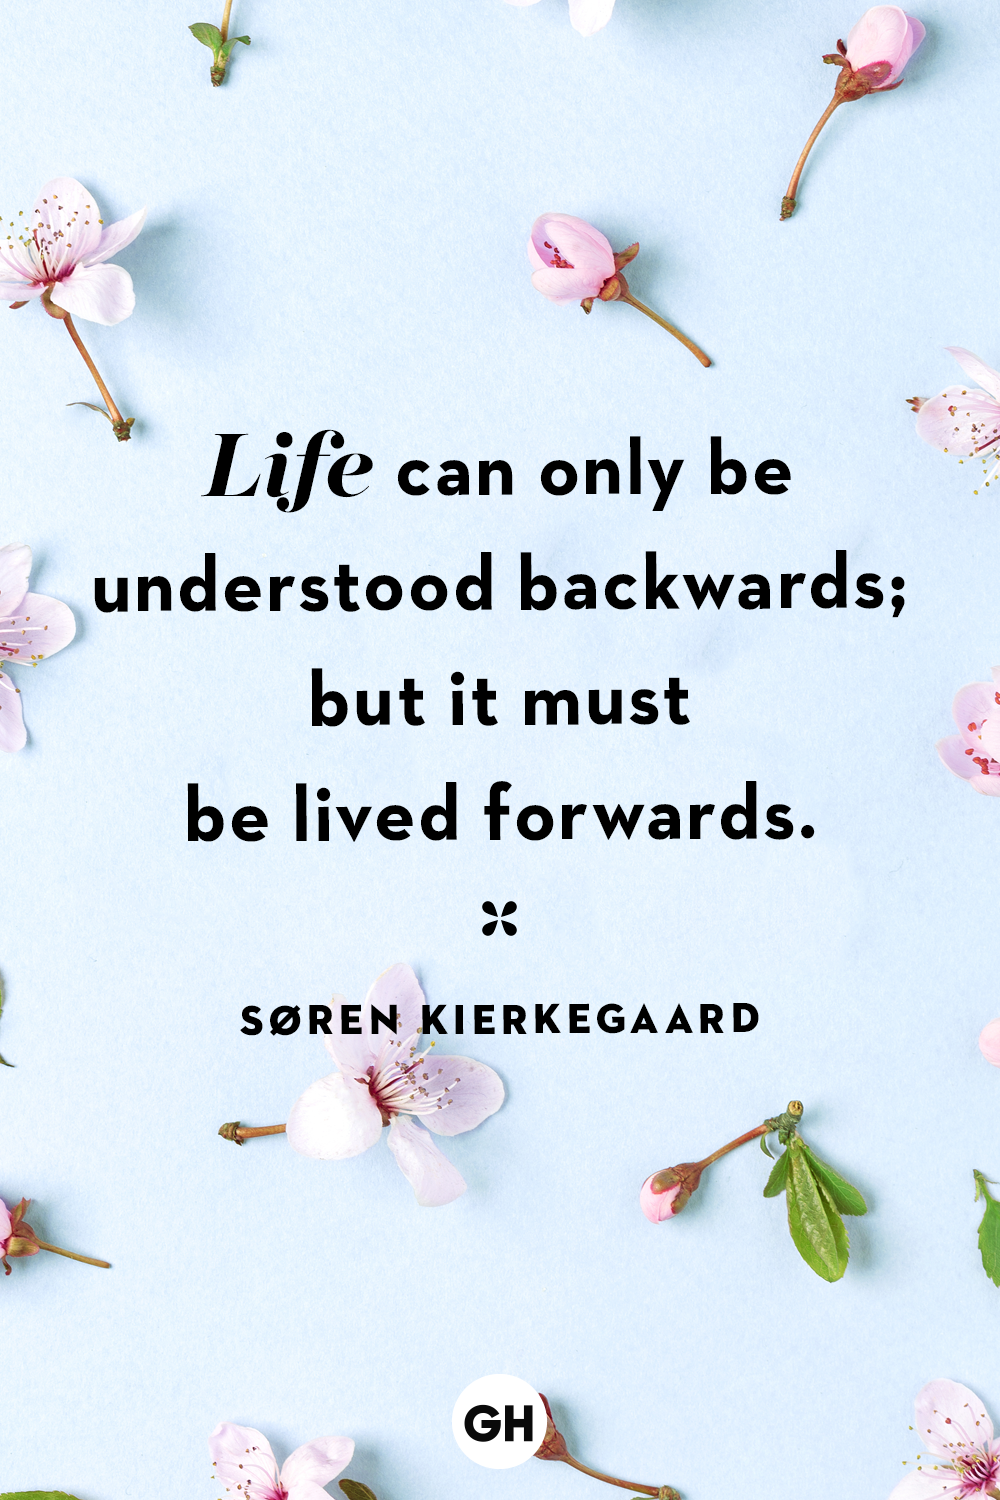 152 Best Life Quotes: Positive, Unique and Inspiring Life Sayings